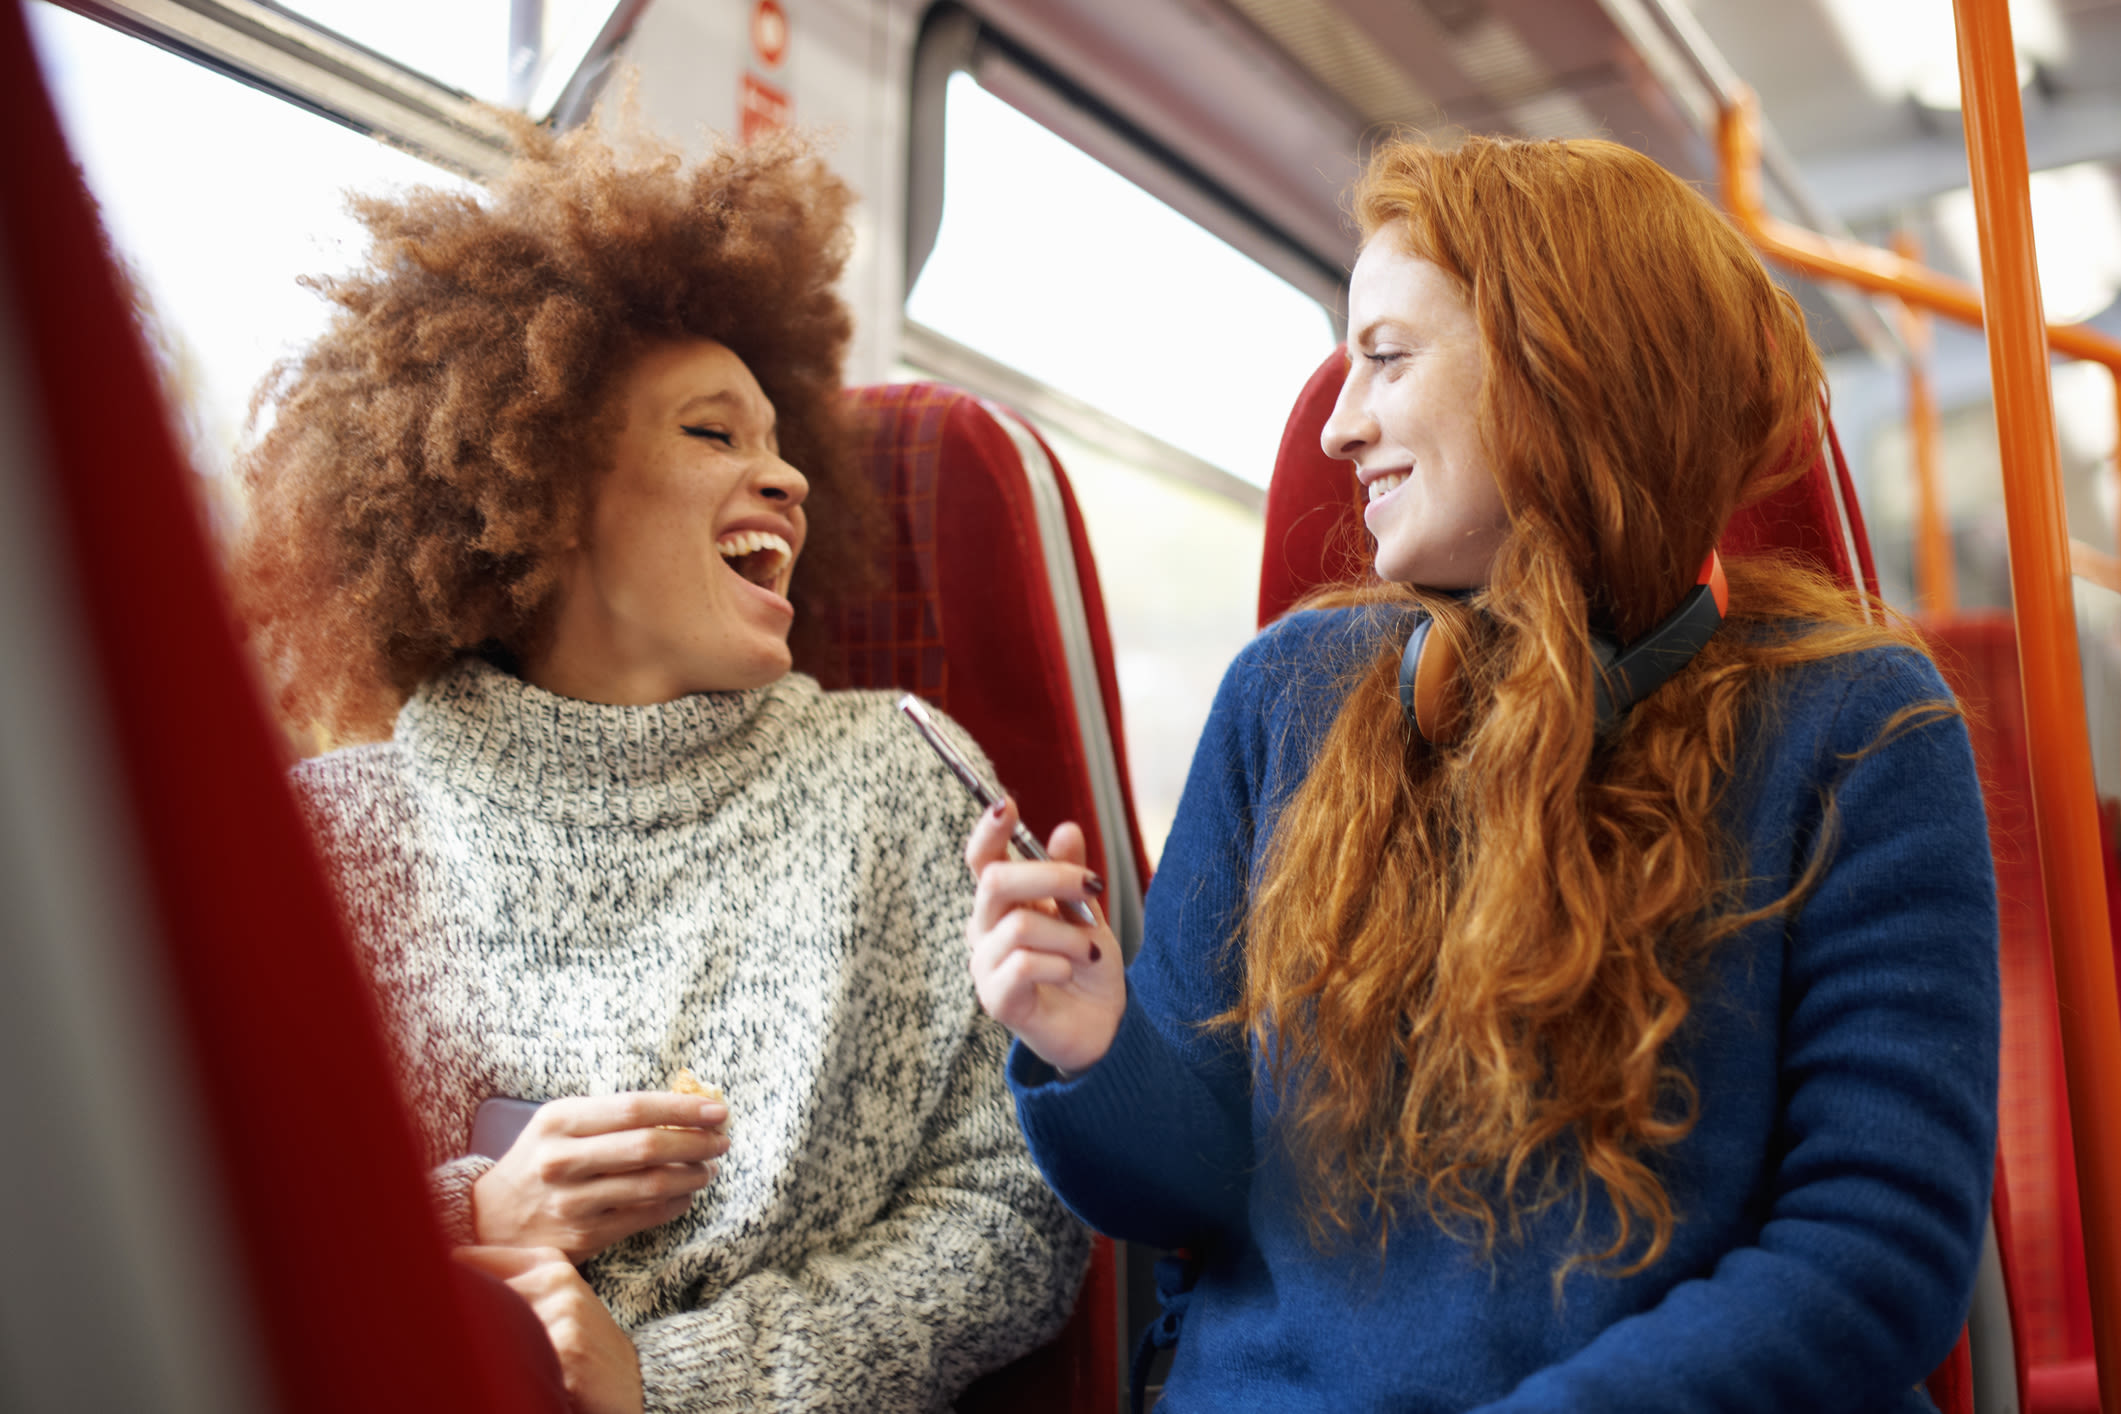 Two women laughing on a train